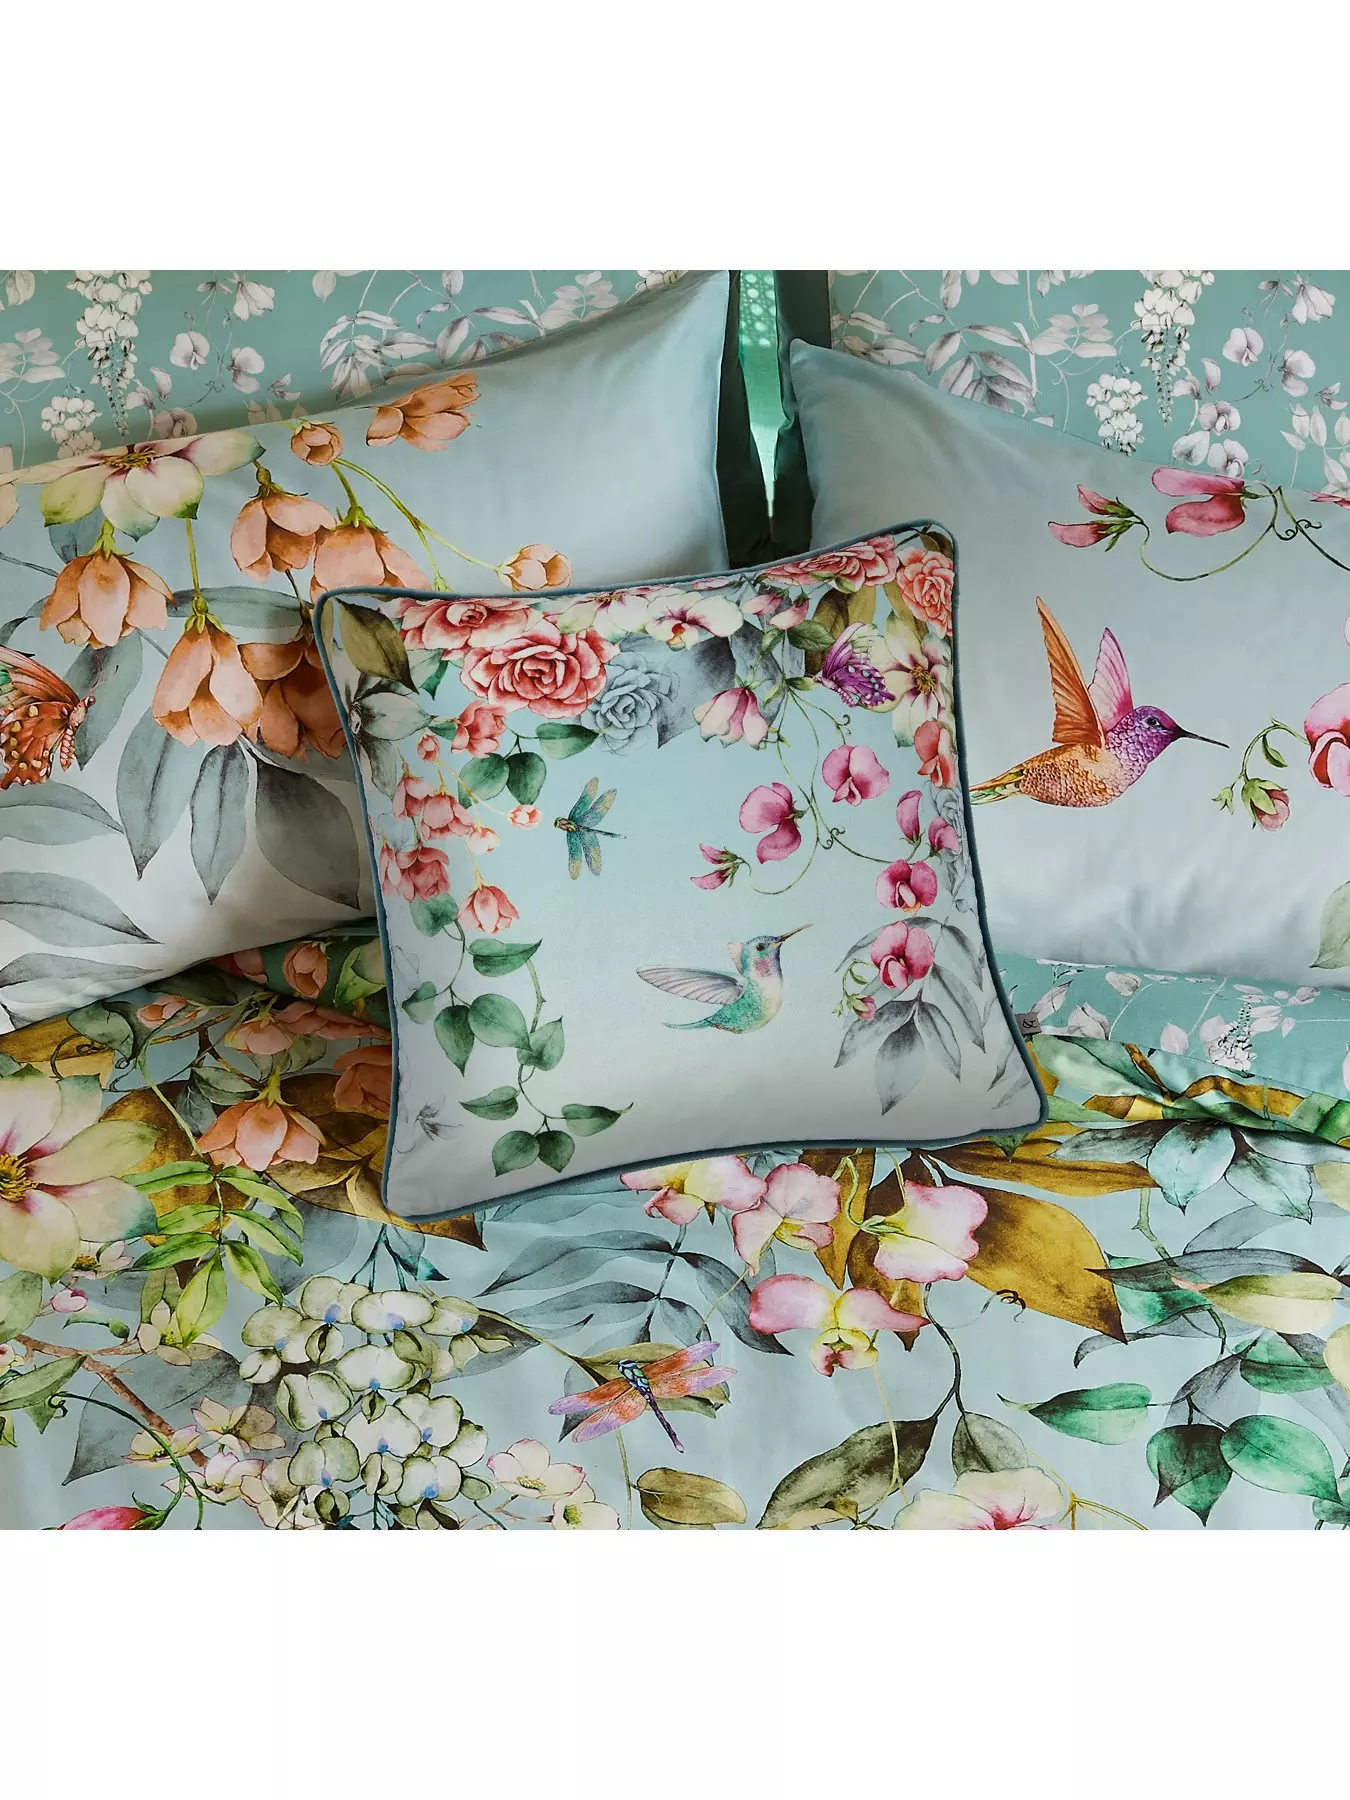 Graham & Brown Ethereal Flora Duvet Cover and Pillowcase Set